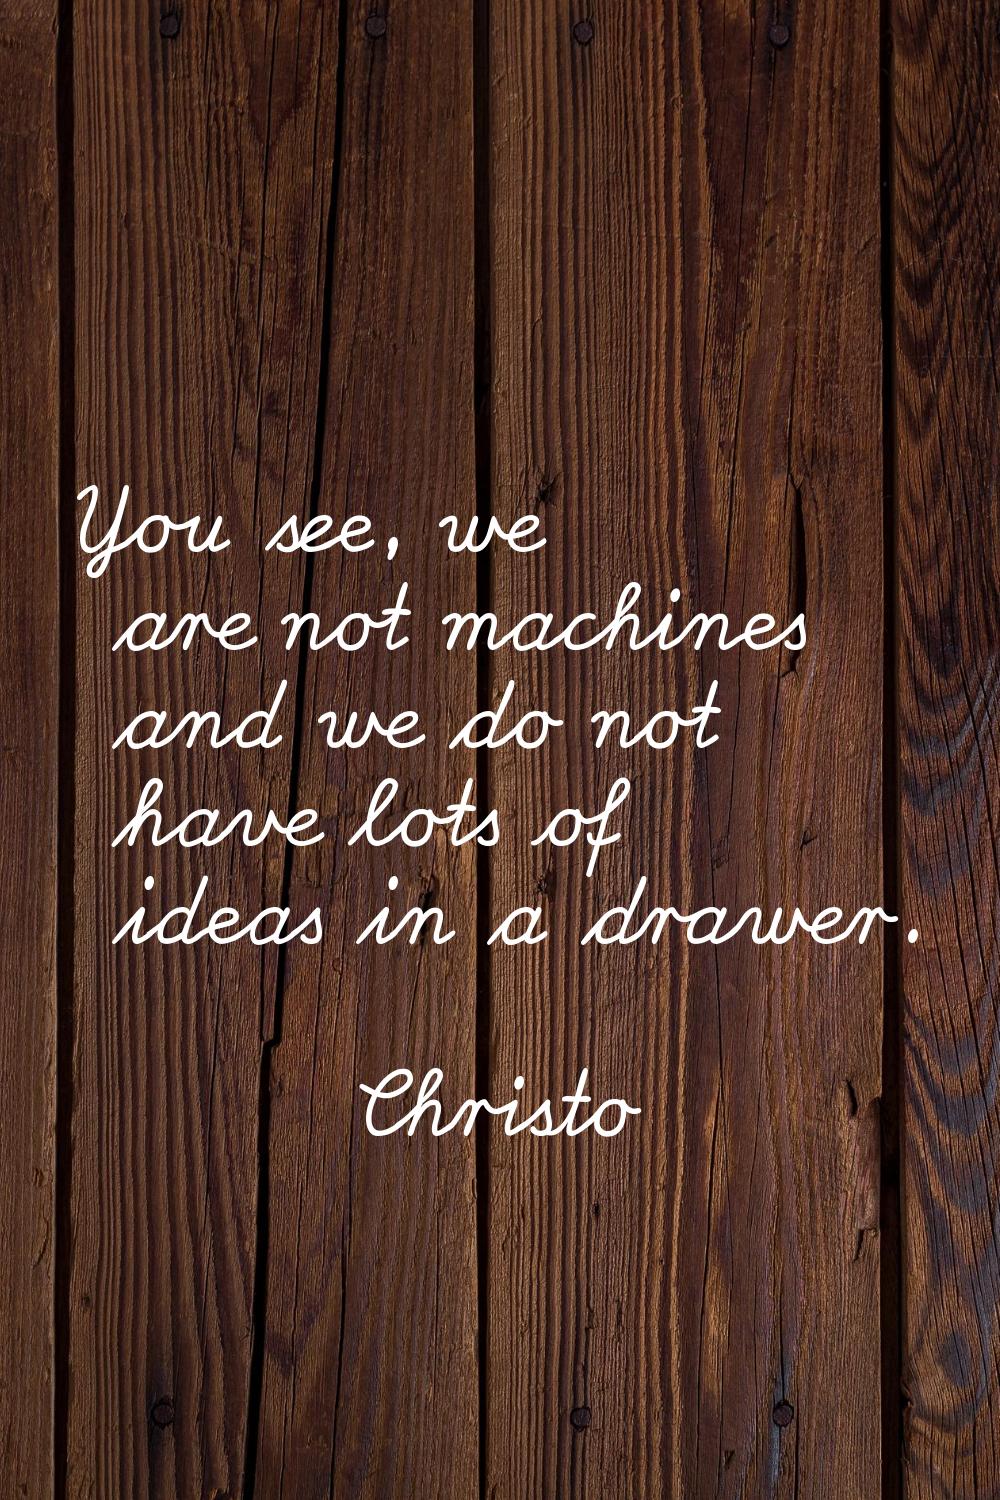 You see, we are not machines and we do not have lots of ideas in a drawer.